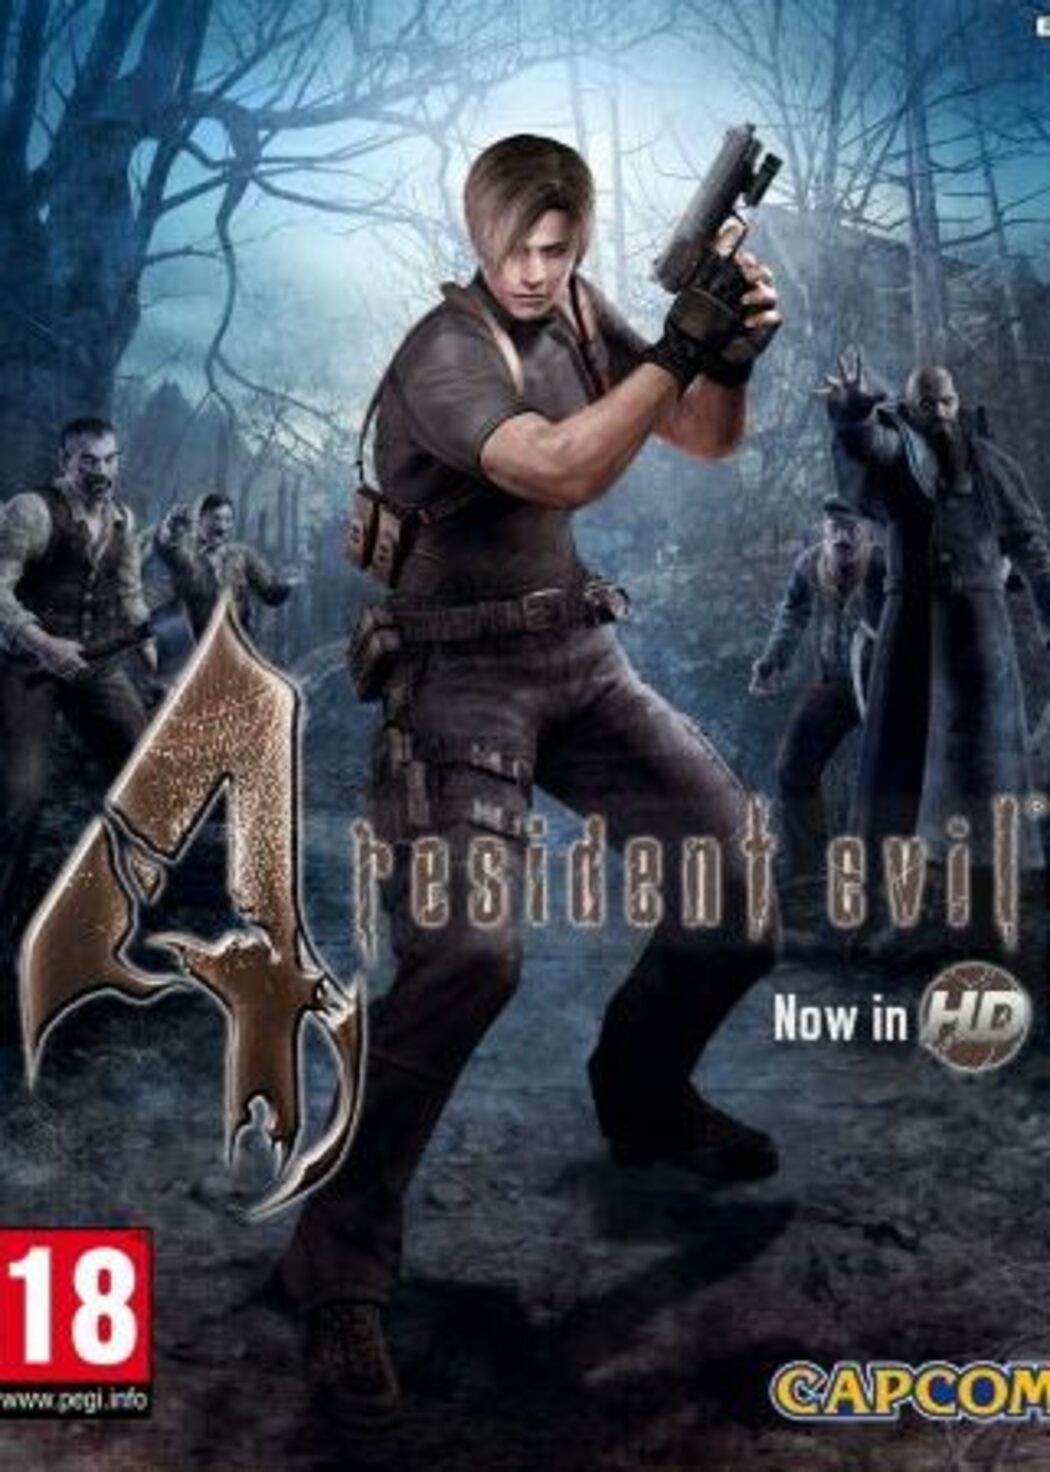 Resident evil 4 pc game system requirements polreartof